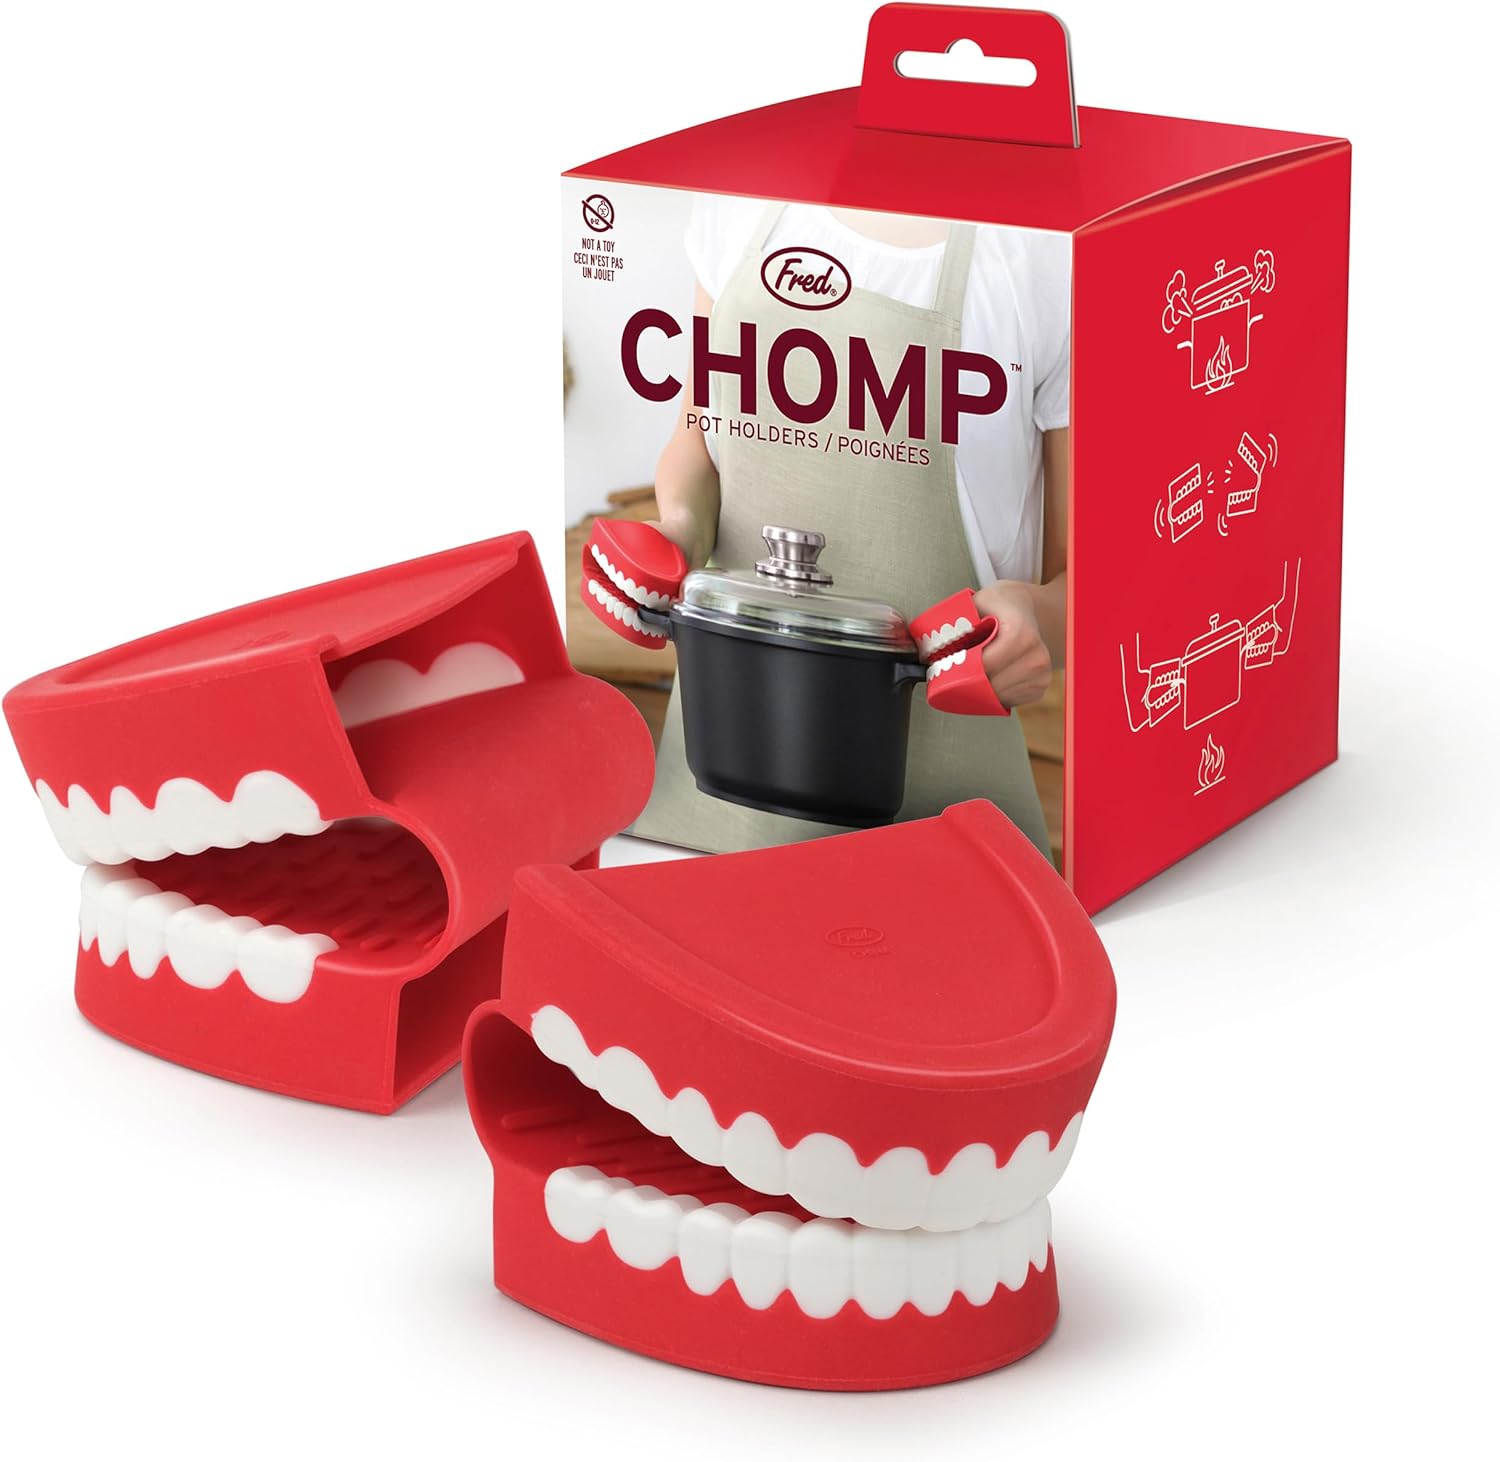 Genuine Fred Chomp Pot Holders, Oven Mitts, Set of 2, Chattering Teeth Inspired, Heat Resistant Silicone Oven Grips, Fun, Quirky Kitchen Gadget and Accessory